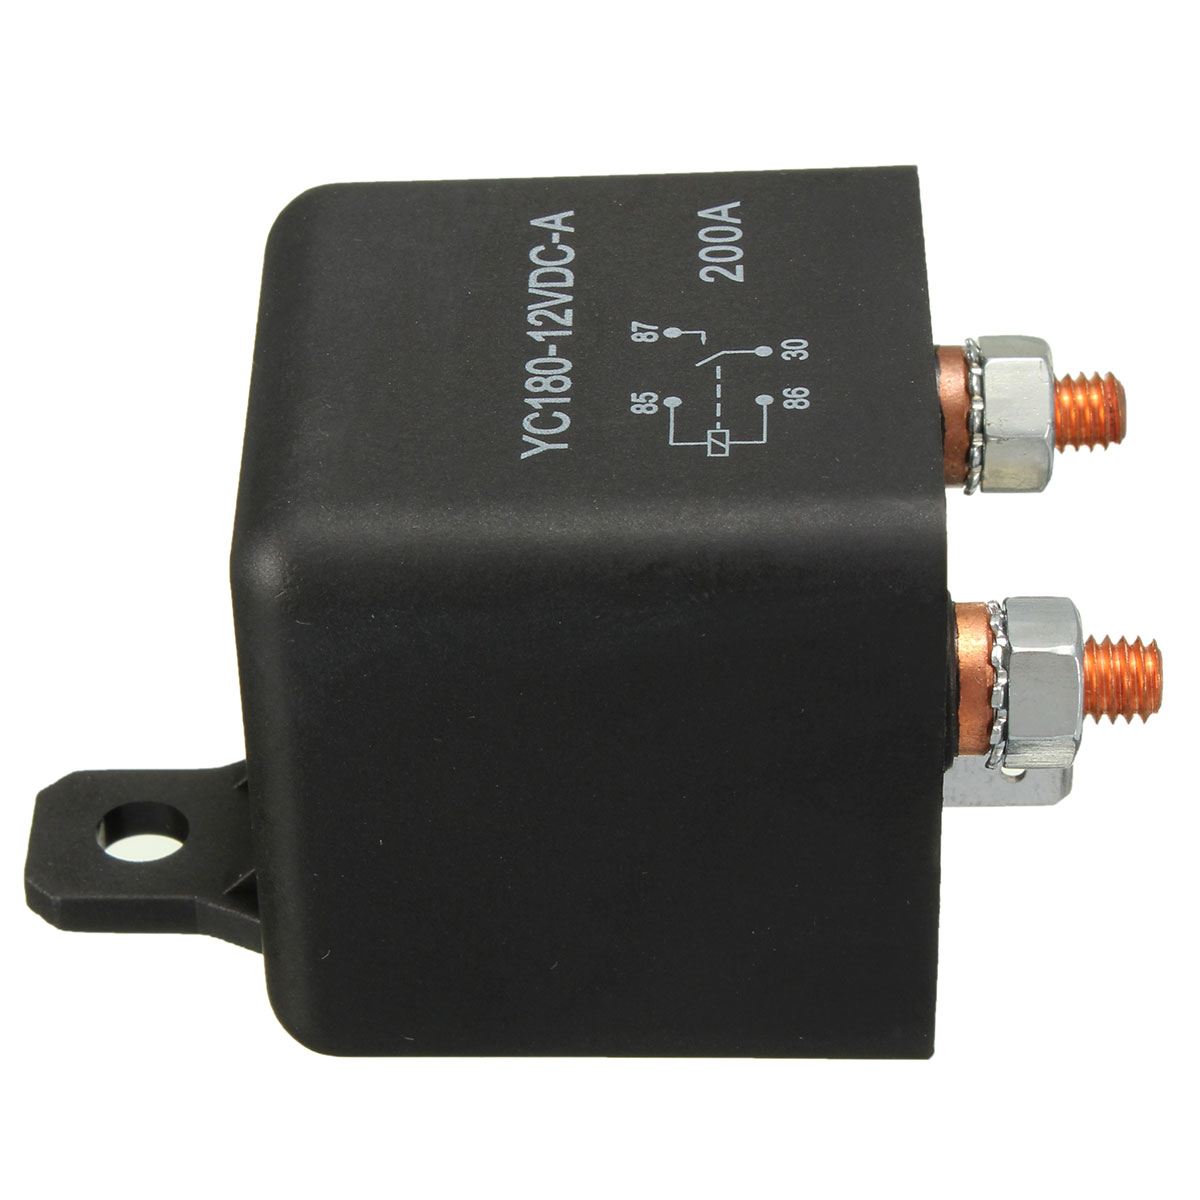 12v 200 amp heavy duty split charge/Winch relay for car van boat 4 pin ld 